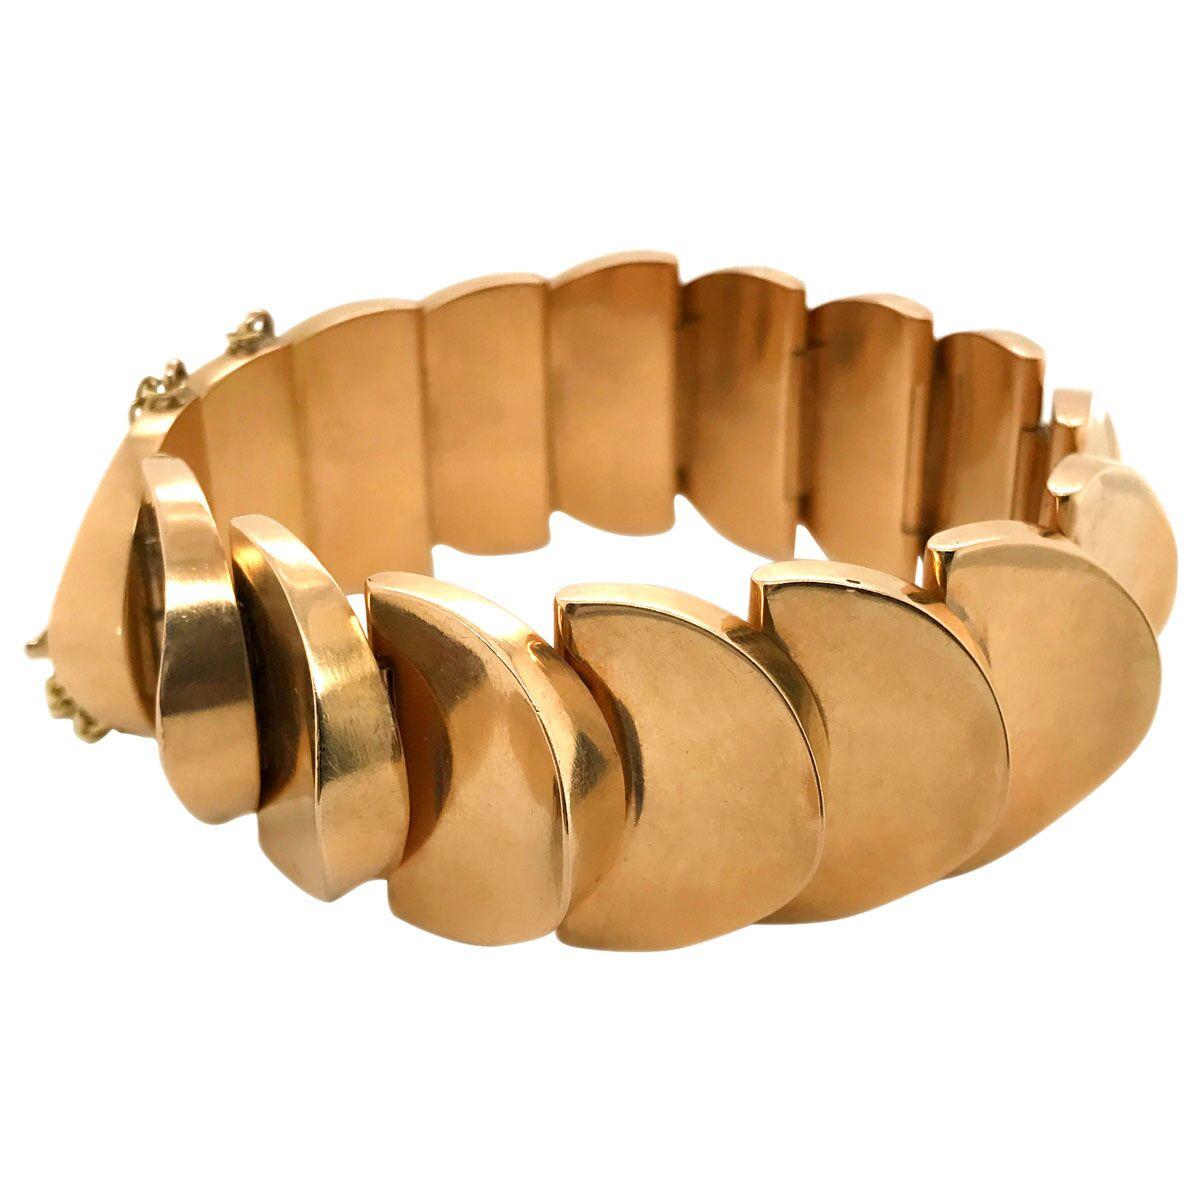 How cool is this bracelet? Fashionable, timeless and a little bit funky. Thinking of those sunny days sitting on the outside terrace by the pool adorned in 1940's retro gold jewellery this bracelet would not be out of place. 
It's a standout, a one